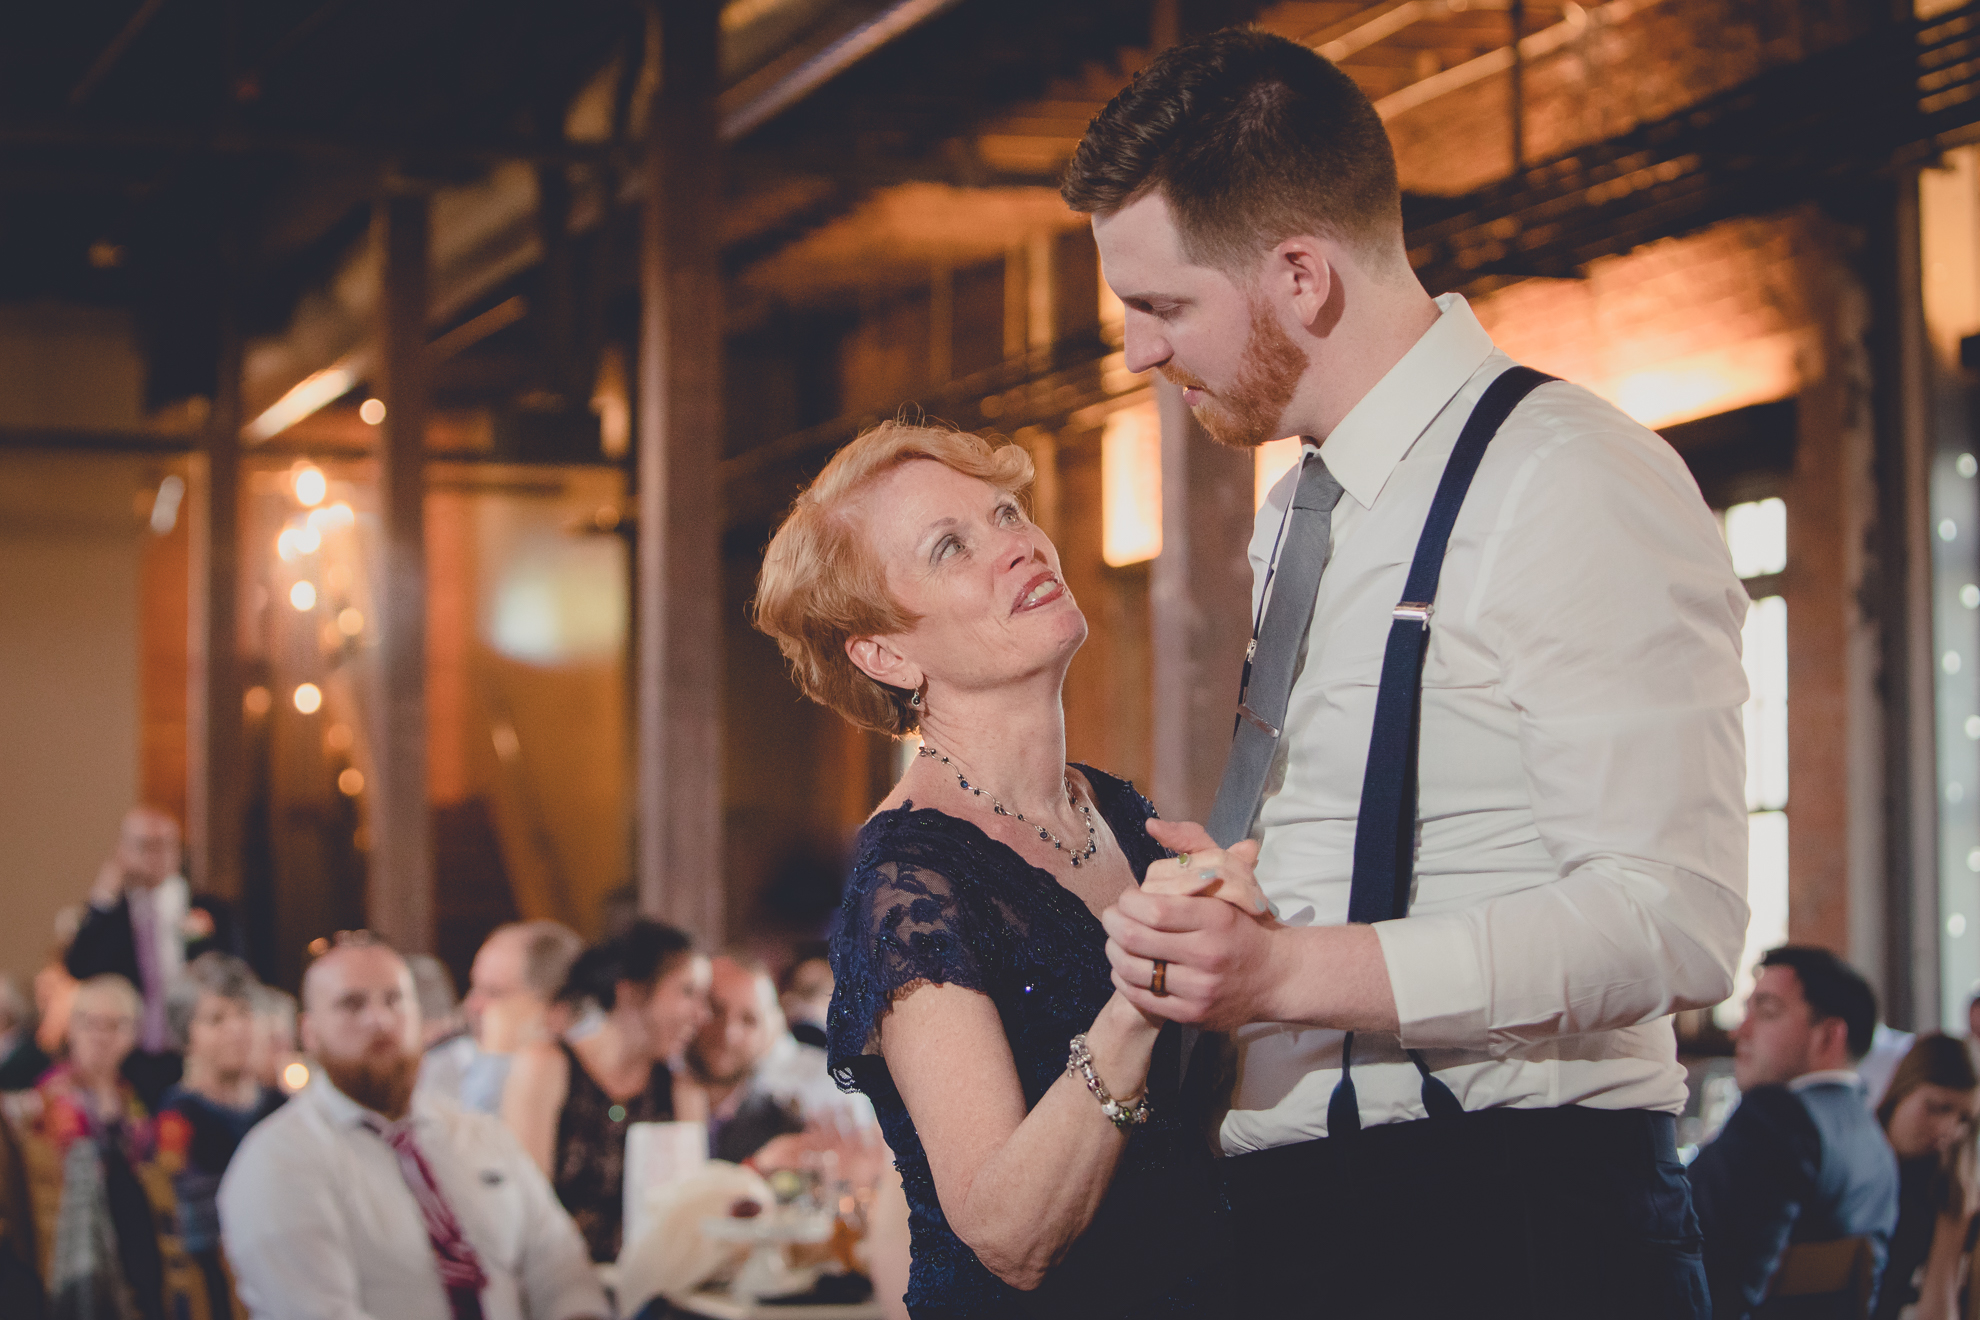 Mother and groom dance during wedding reception at the Barrel Factory in Buffalo, NY